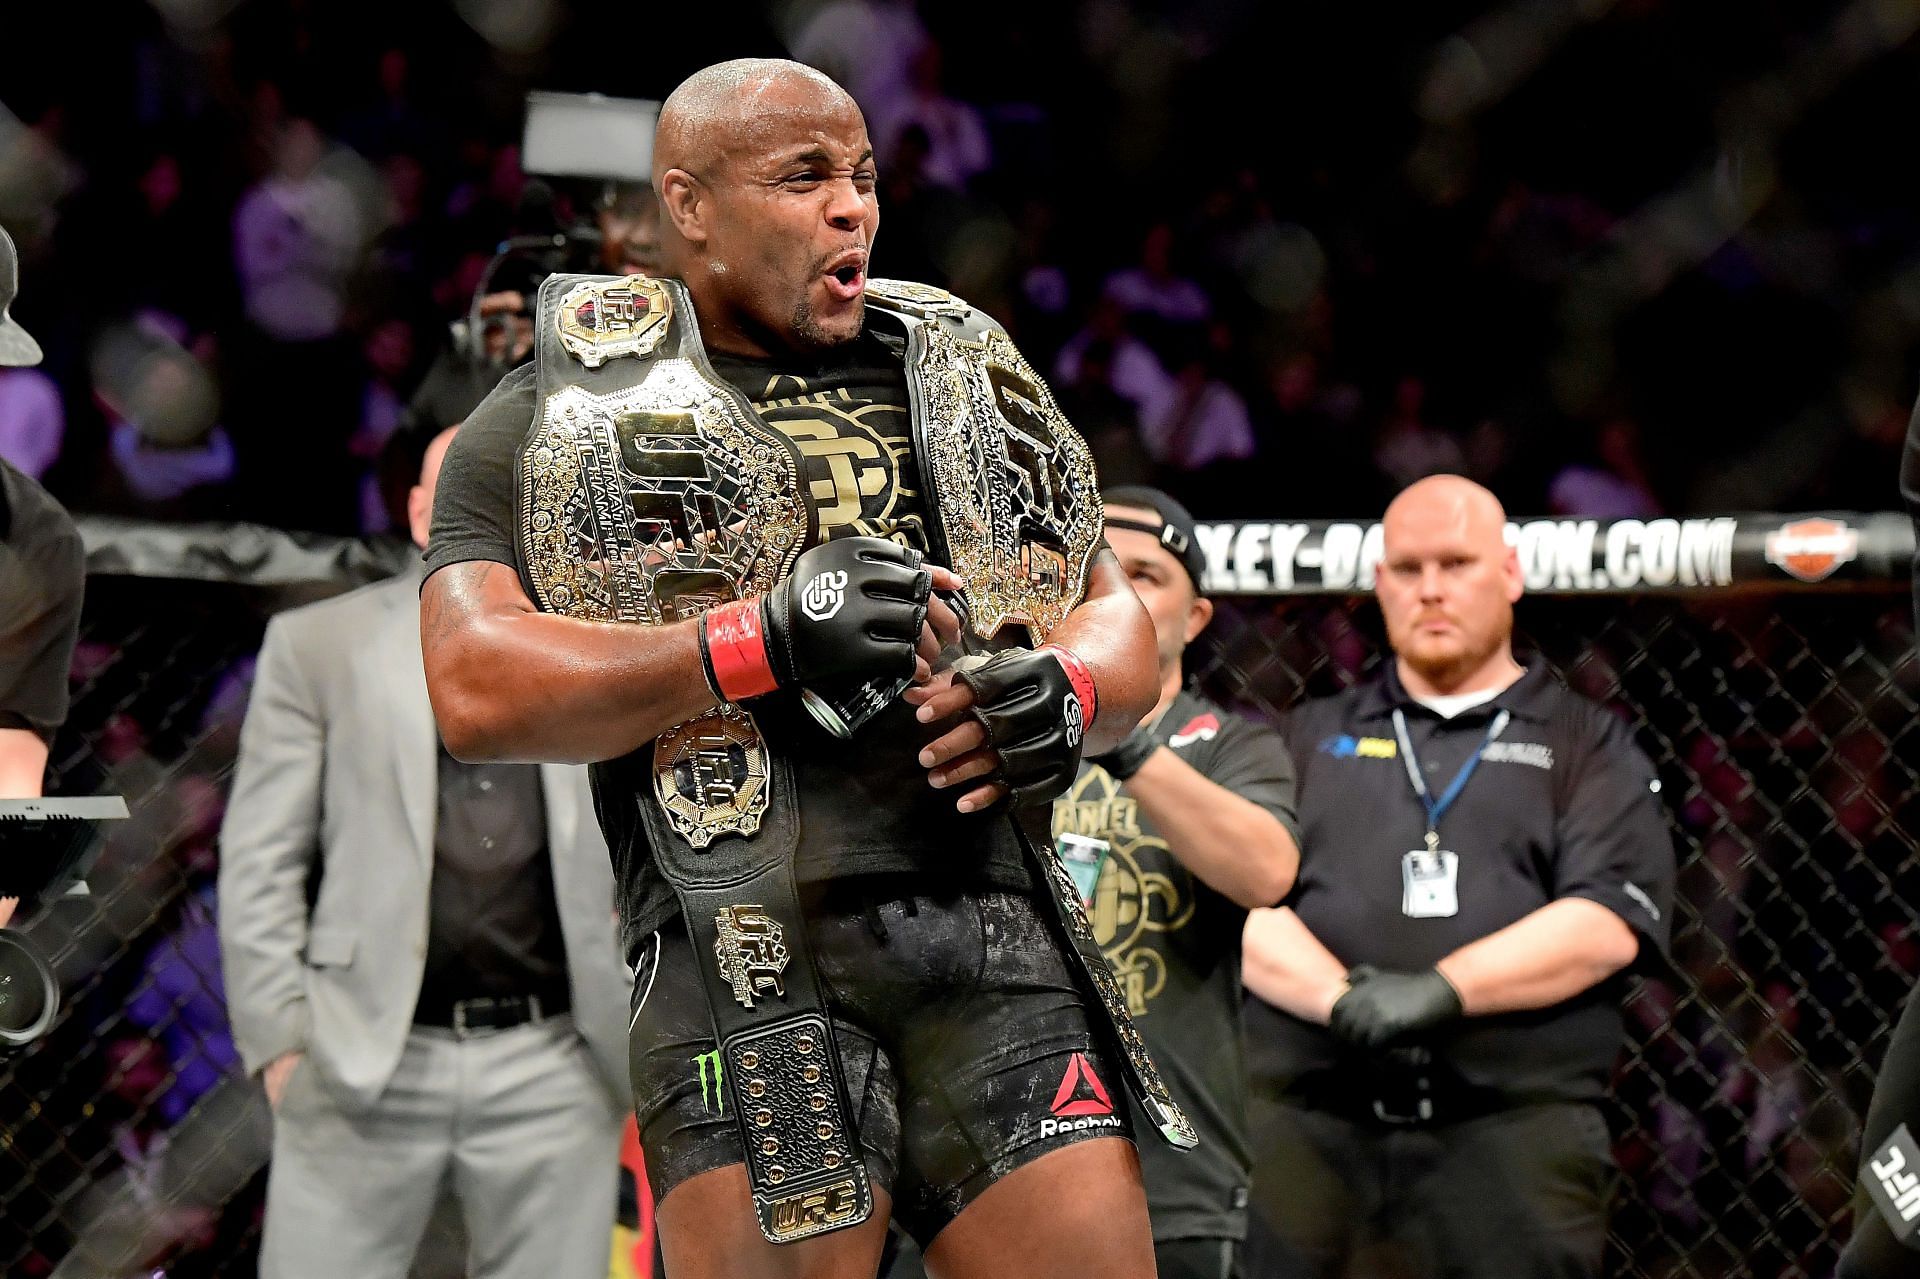 10 Best UFC Fighters of All Time (Updated 2023) - GeeksforGeeks